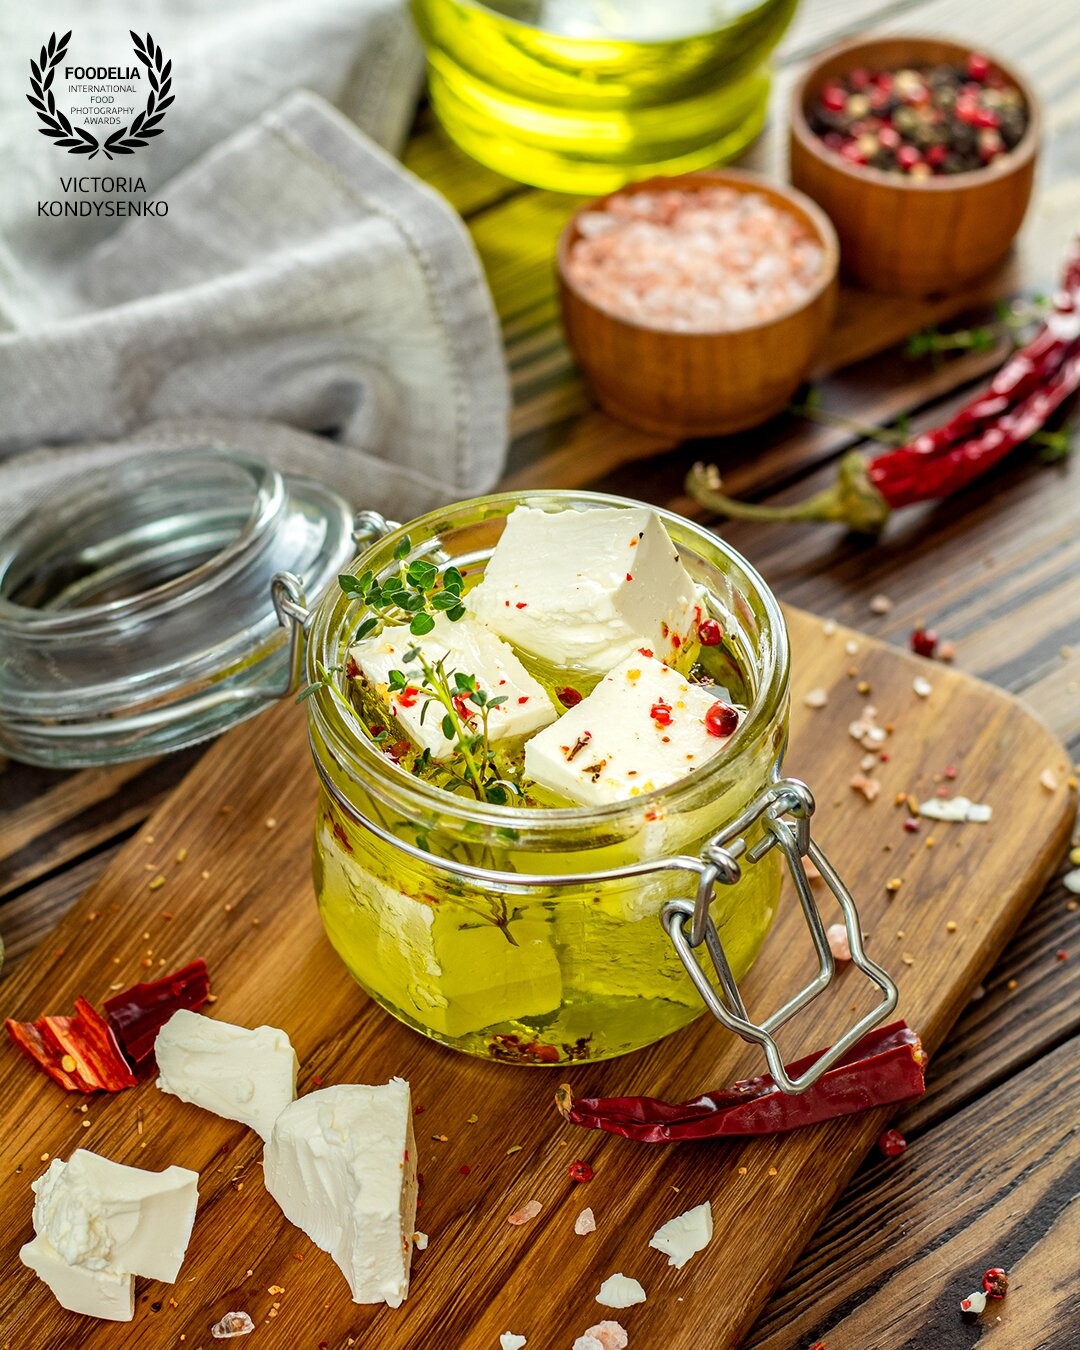 Marinated Feta Cheese is a simple to prepare appetiser that is packed full of delicious flavours. Garlic, rosemary, lemon and a little chilli combine with the Feta Cheese and Extra Virgin Olive Oil, which works perfectly with slices of crusty bread